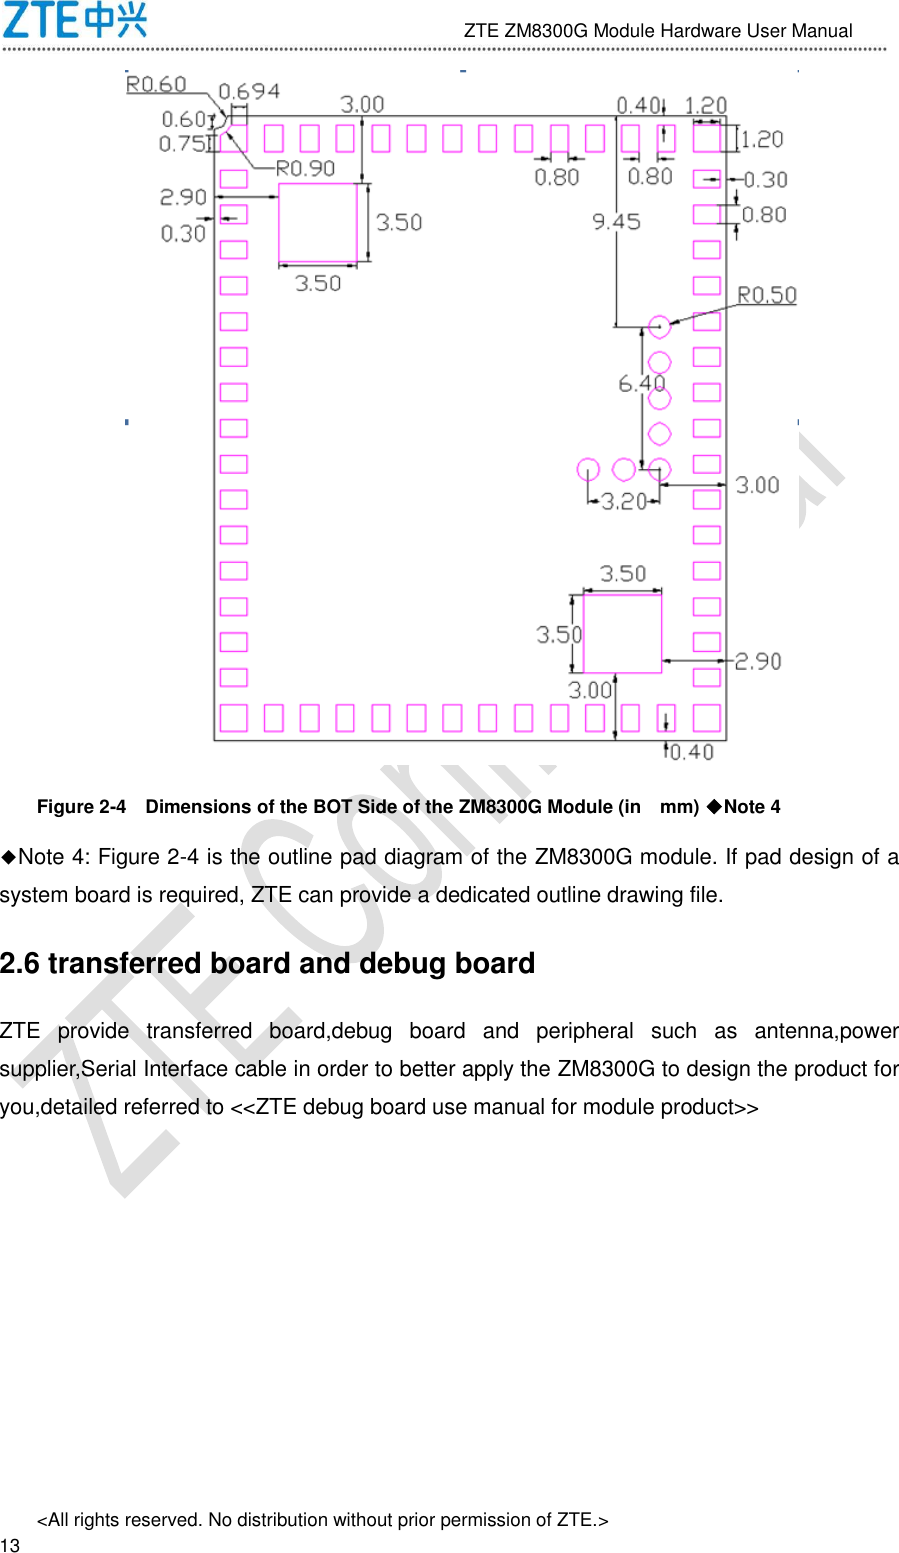                              ZTE ZM8300G Module Hardware User Manual &lt;All rights reserved. No distribution without prior permission of ZTE.&gt;                                                               13  Figure 2-4    Dimensions of the BOT Side of the ZM8300G Module (in    mm) ◆Note 4 ◆Note 4: Figure 2-4 is the outline pad diagram of the ZM8300G module. If pad design of a system board is required, ZTE can provide a dedicated outline drawing file. 2.6 transferred board and debug board ZTE  provide  transferred  board,debug  board  and  peripheral  such  as  antenna,power supplier,Serial Interface cable in order to better apply the ZM8300G to design the product for you,detailed referred to &lt;&lt;ZTE debug board use manual for module product&gt;&gt;    